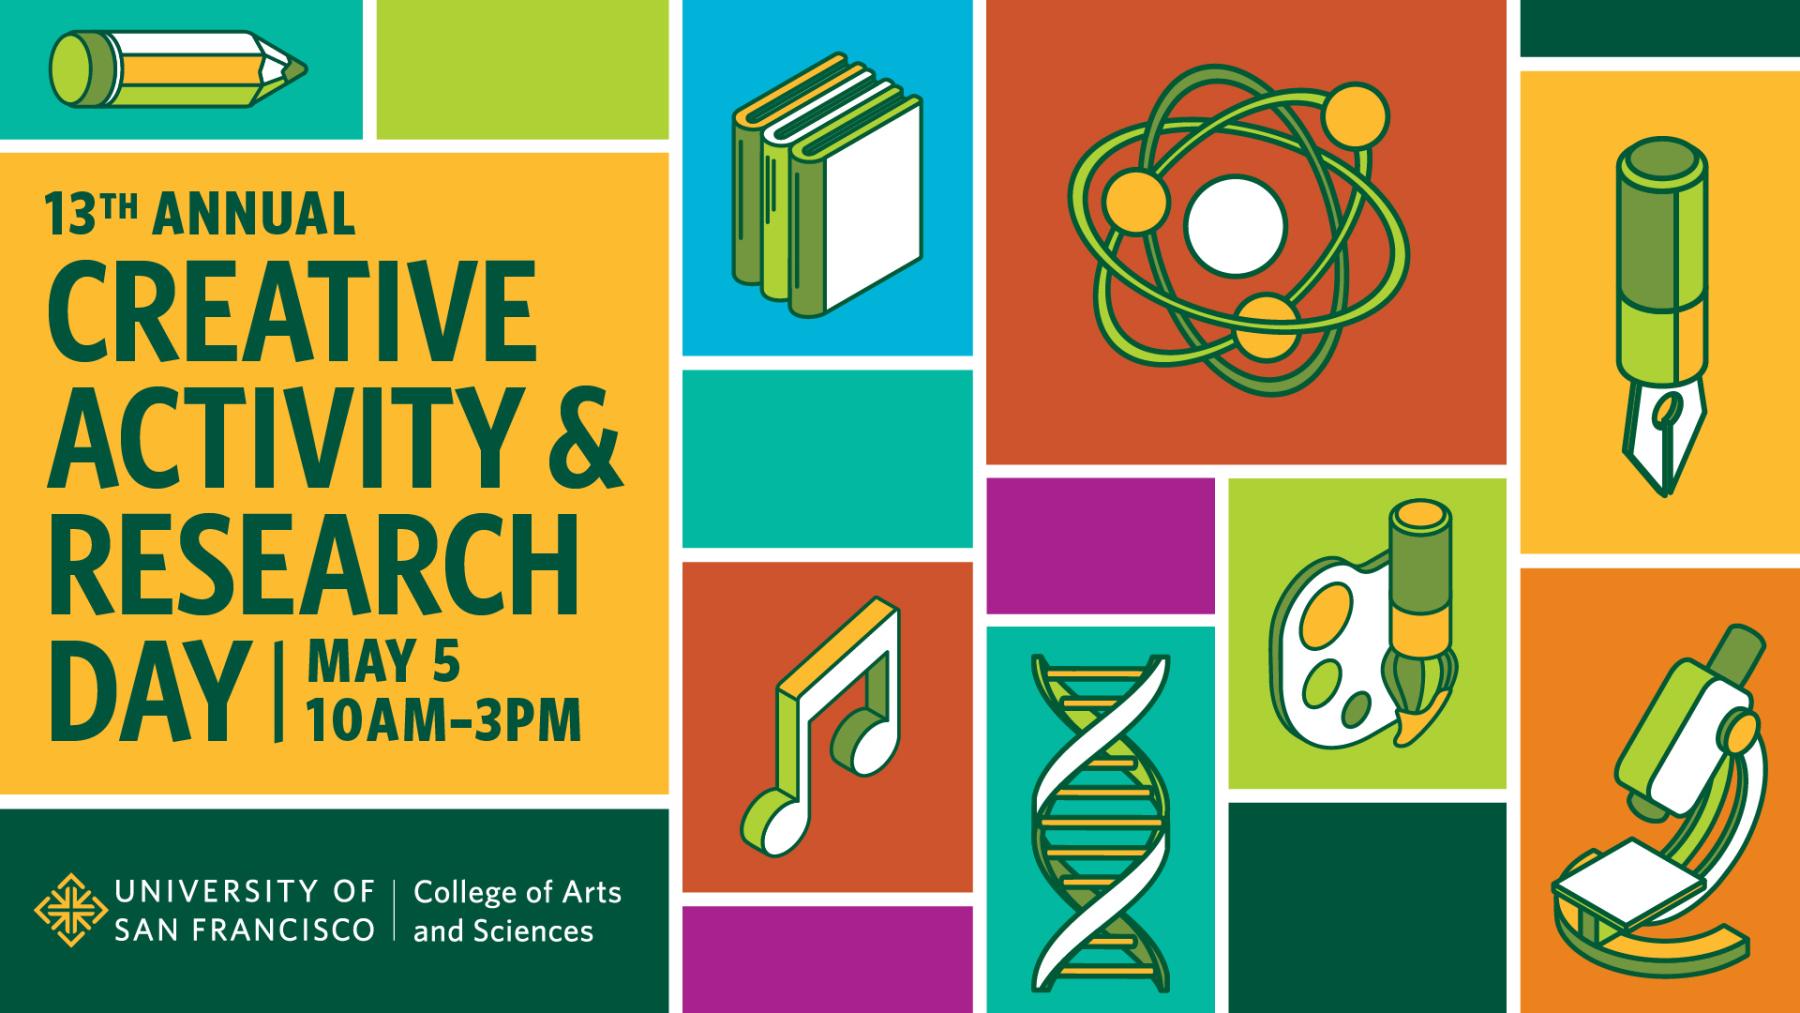 "13th Annual Creative Activity & Research Day"